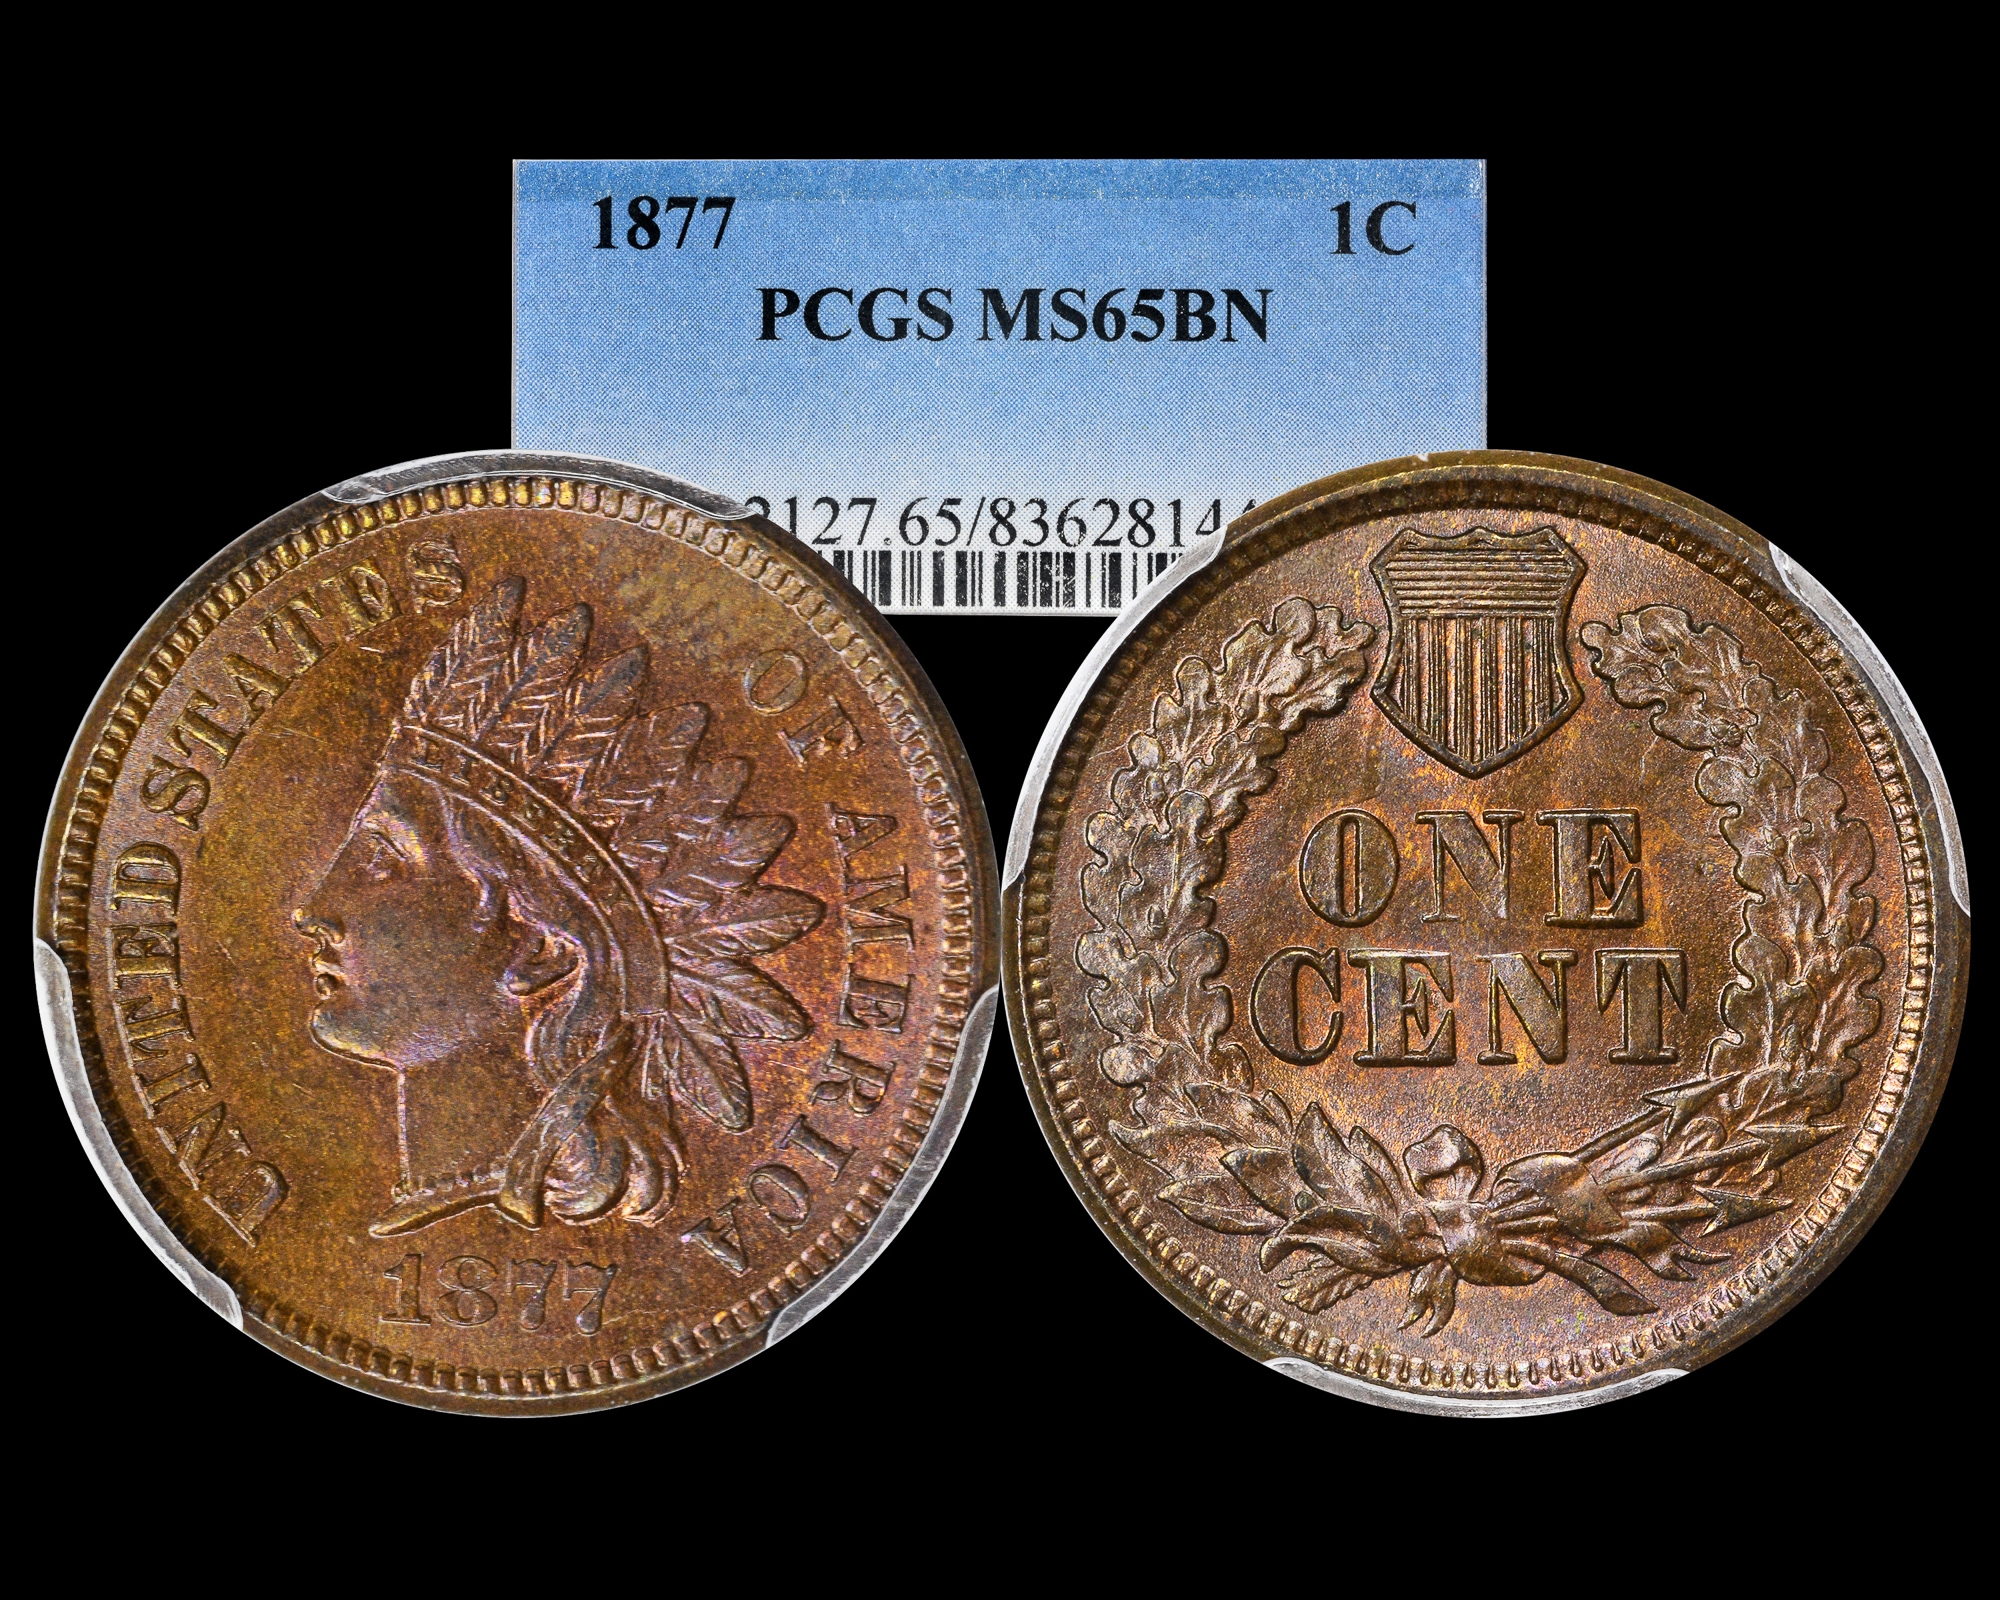 1877 1C Indian Cent PCGS MS65BN Toned - The Penny Lady®